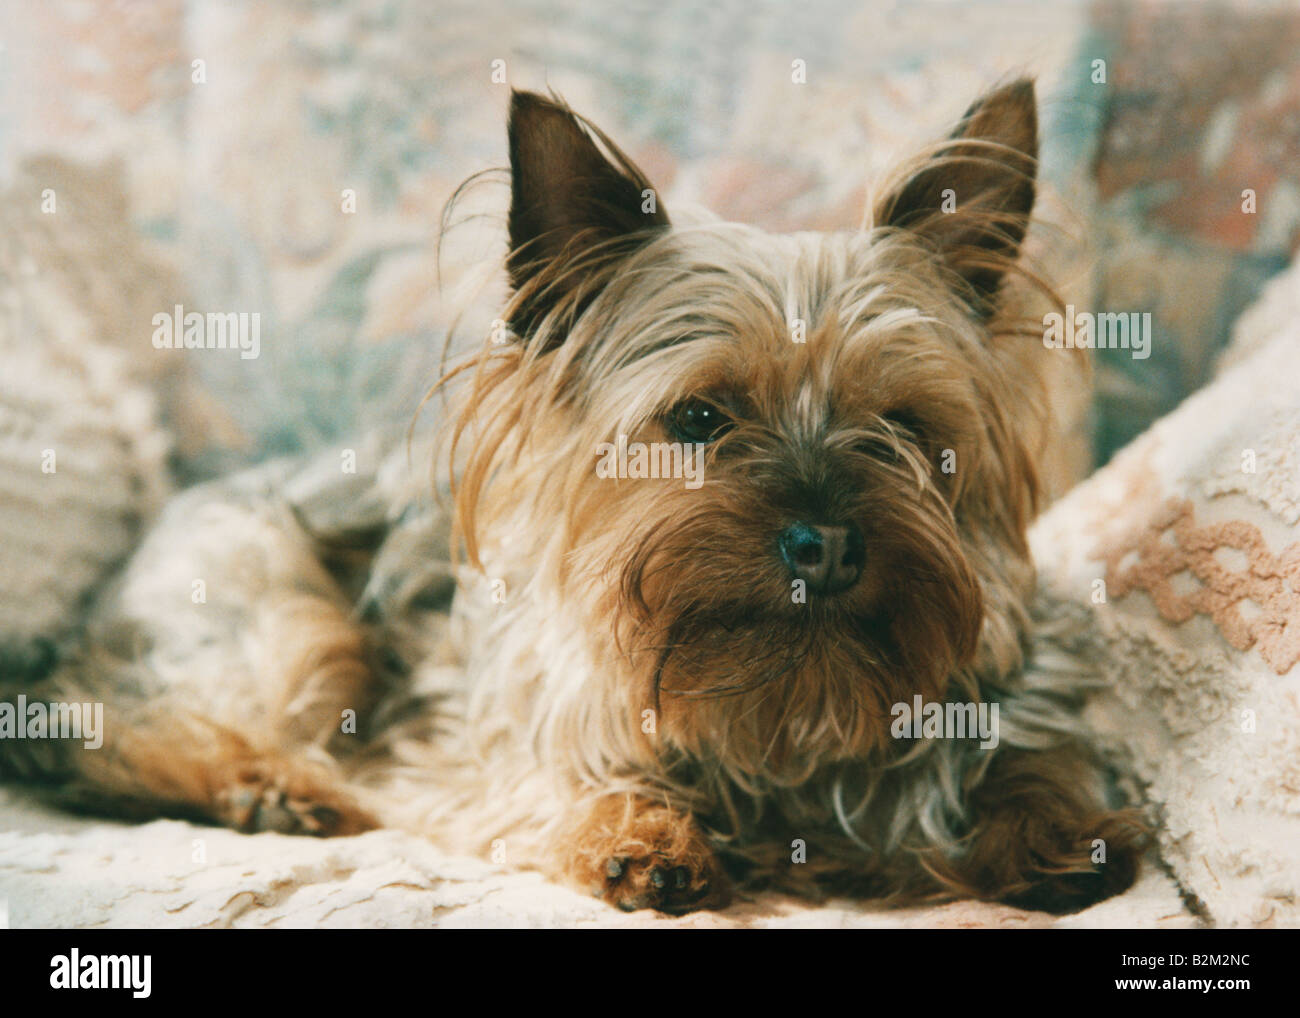 Yorkshire terrier dog looking rather cute Stock Photo